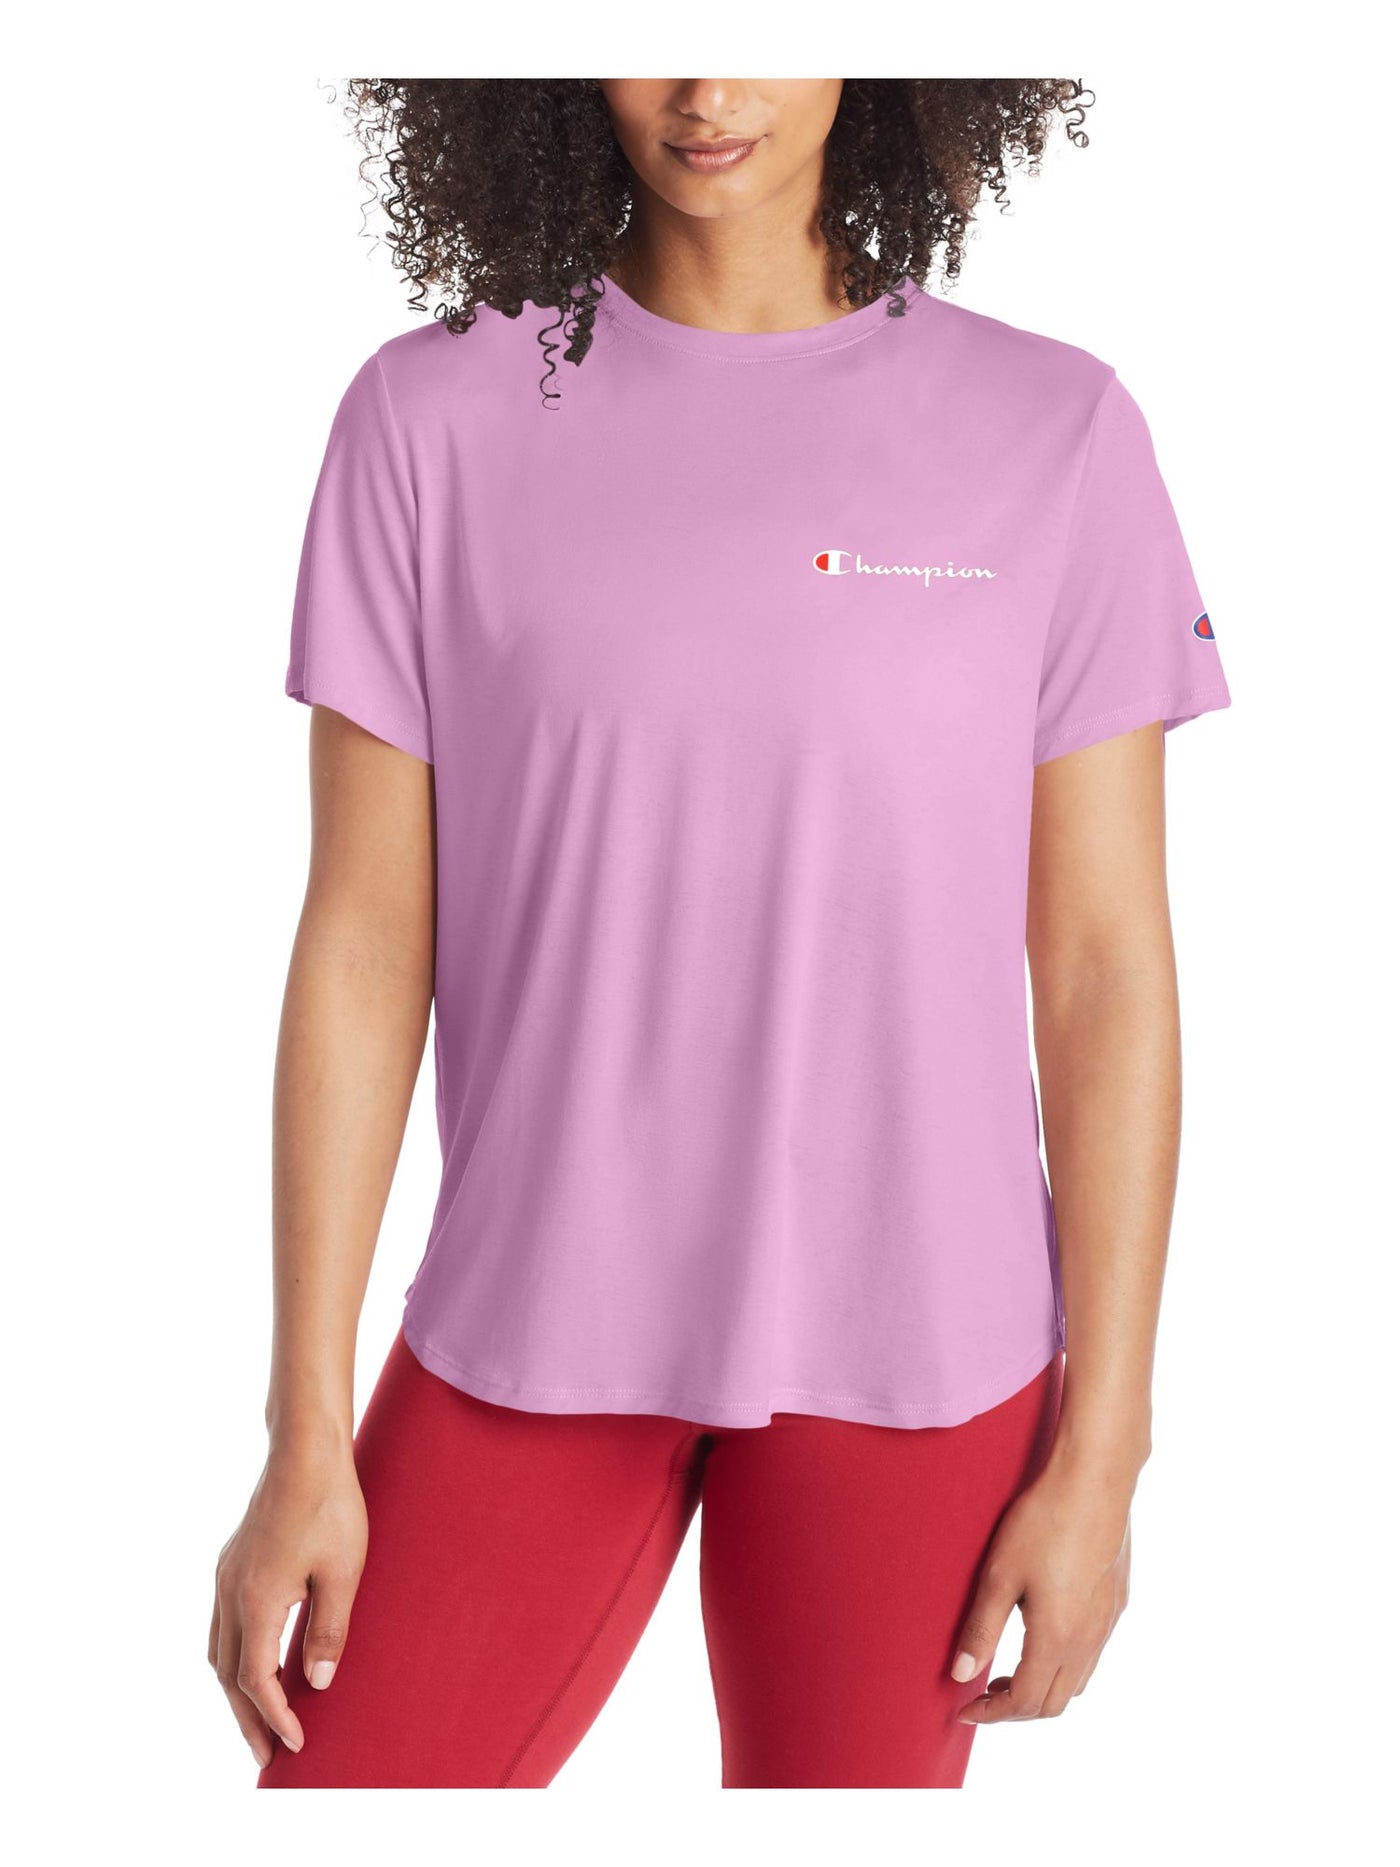 CHAMPION Womens Pink Ribbed Embroidered Short Sleeve Active Wear T-Shirt S